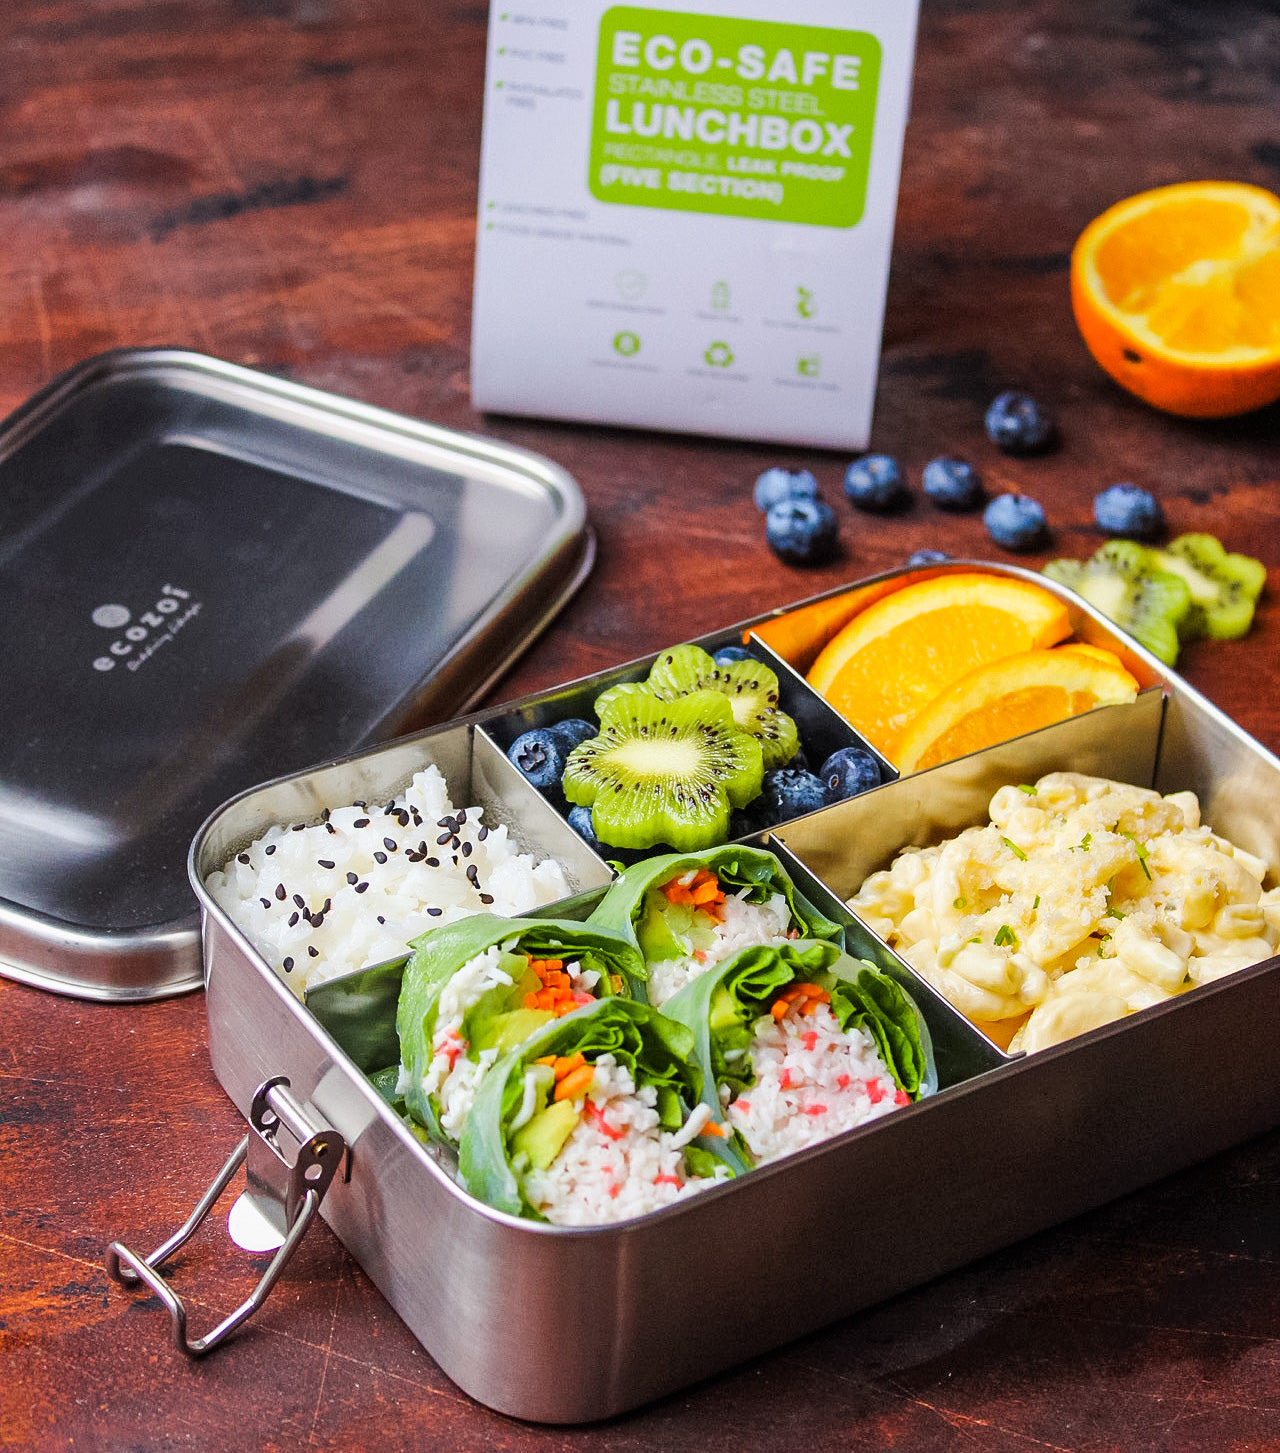  Bento Box, Leakproof Lunch Box Made of Eco-Friendly